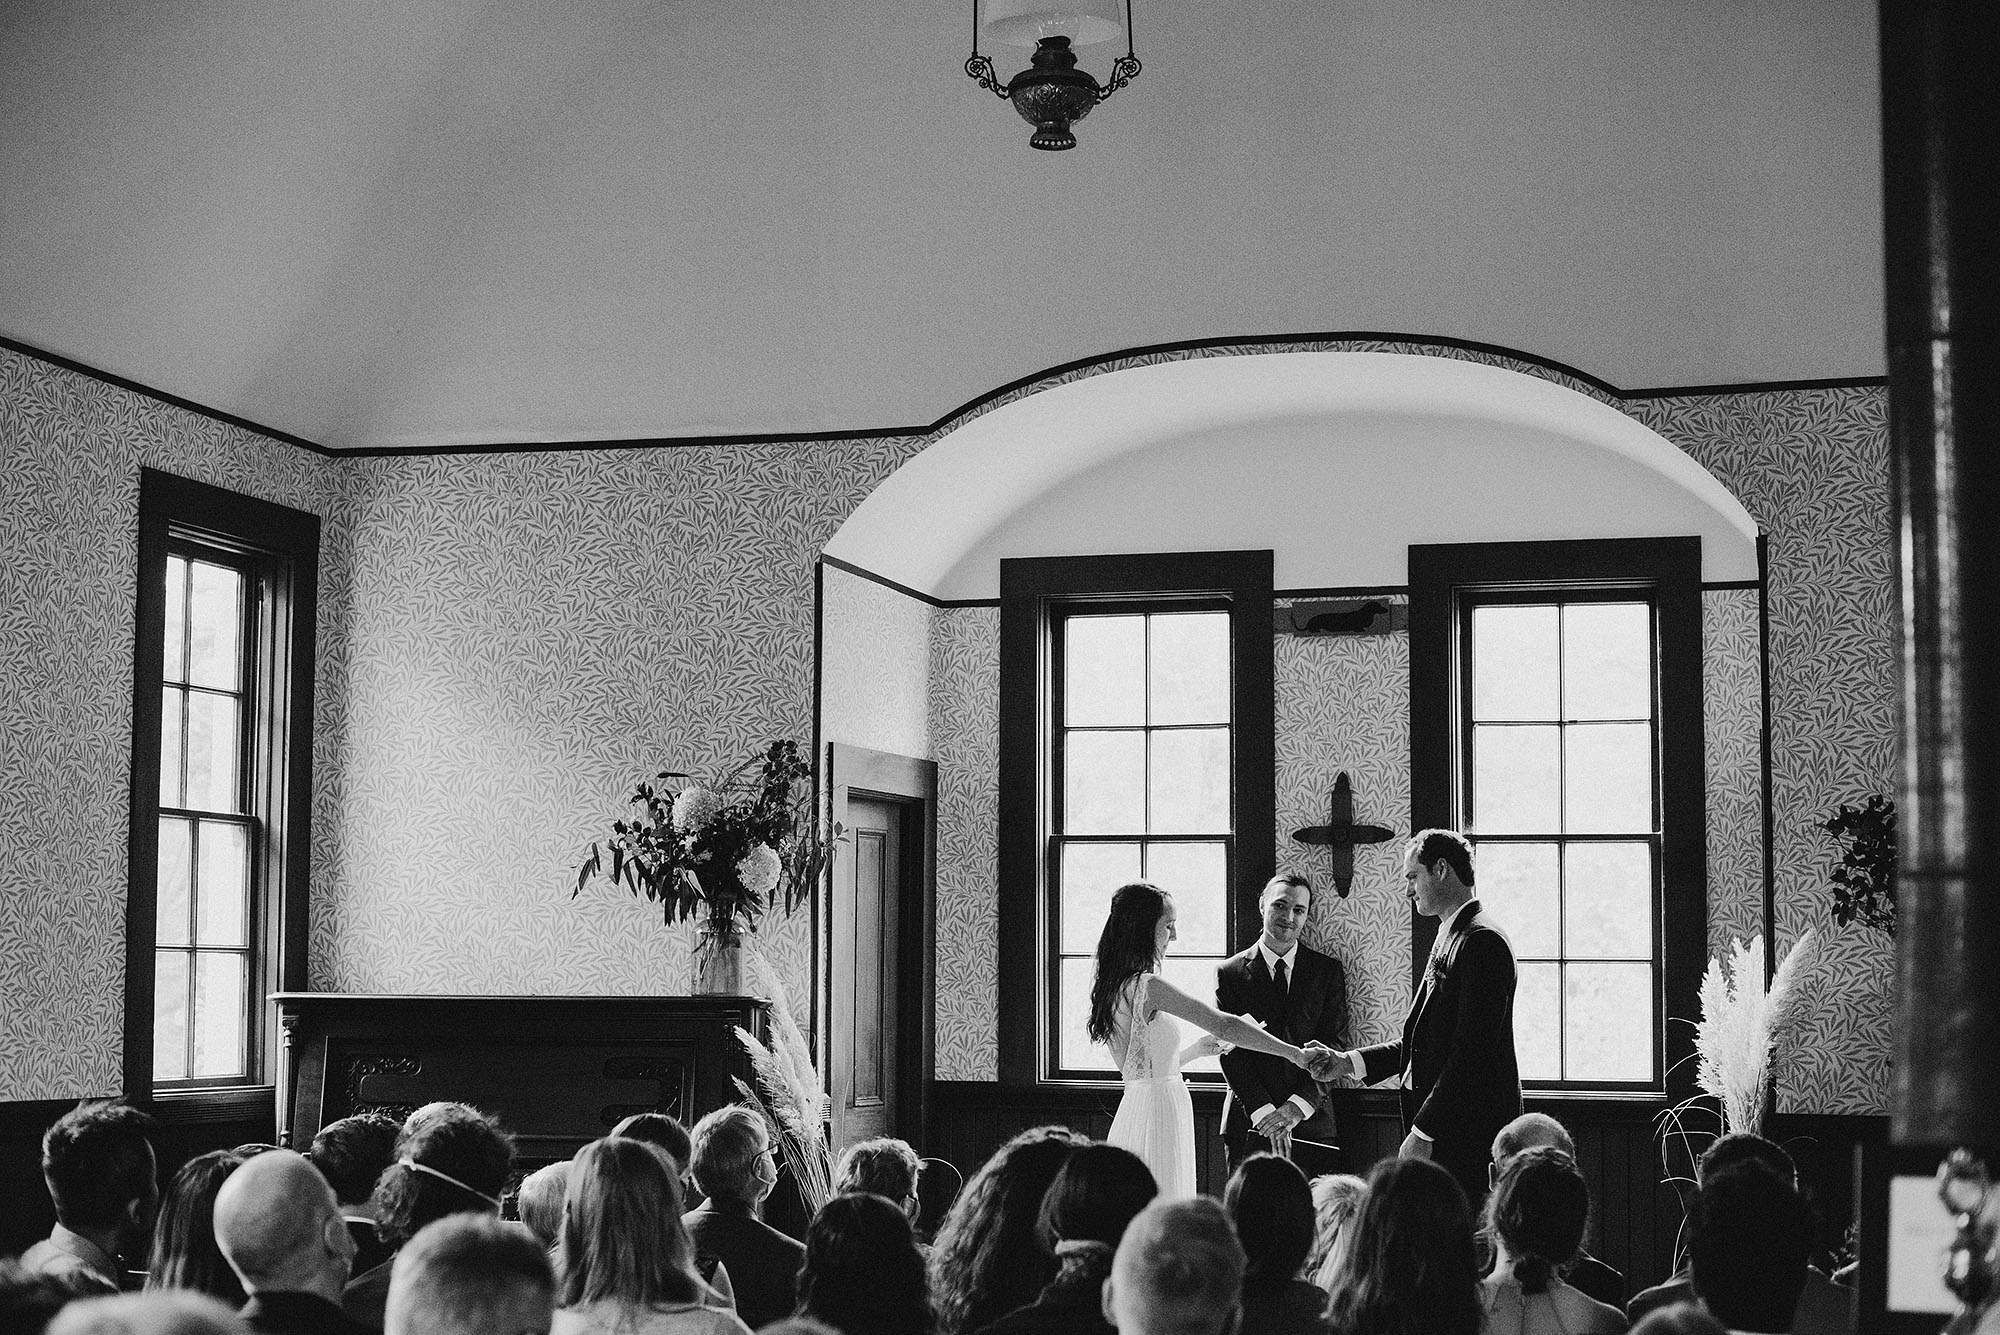 Long Beach Peninsula Wedding Black & White of the Ceremony by Briana Morrison Photography